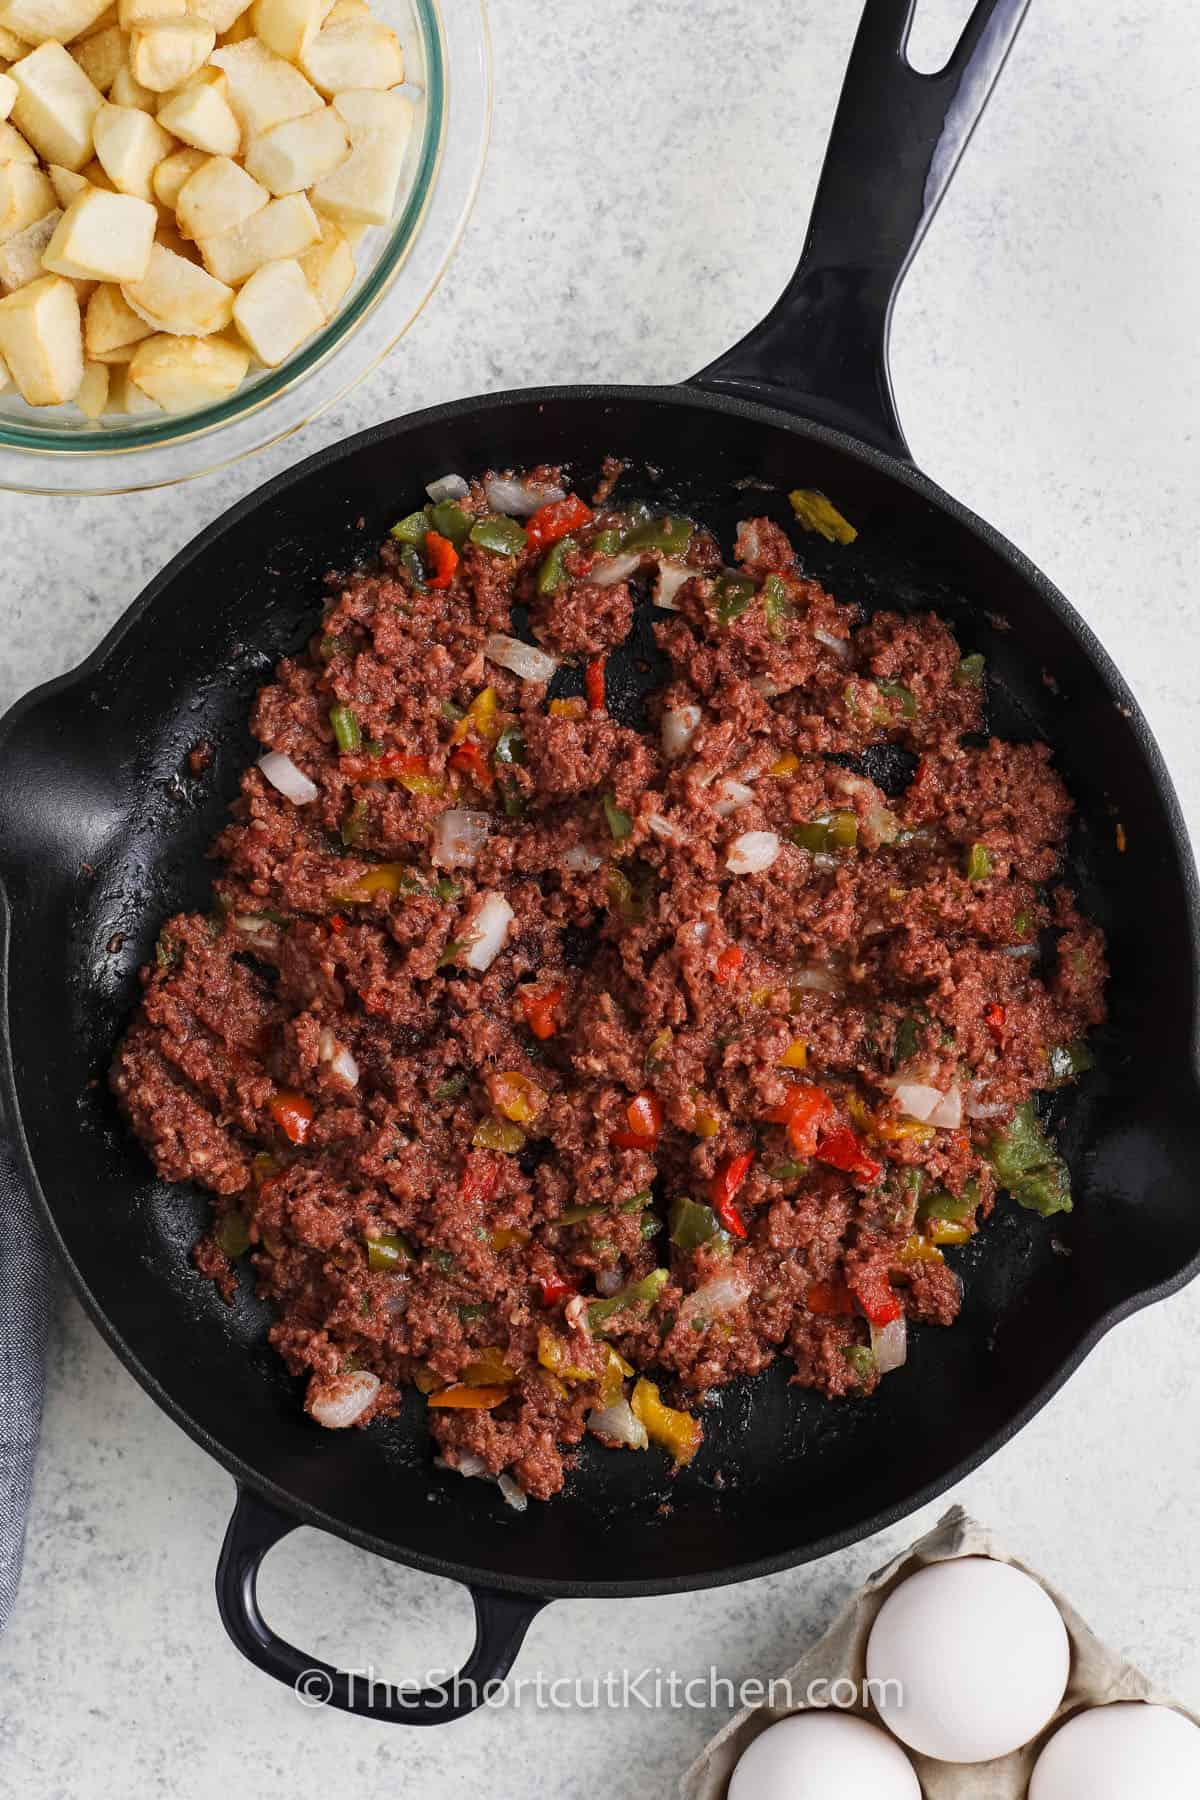 adding corned beef to vegetable mix to make Canned Corned Beef Hash